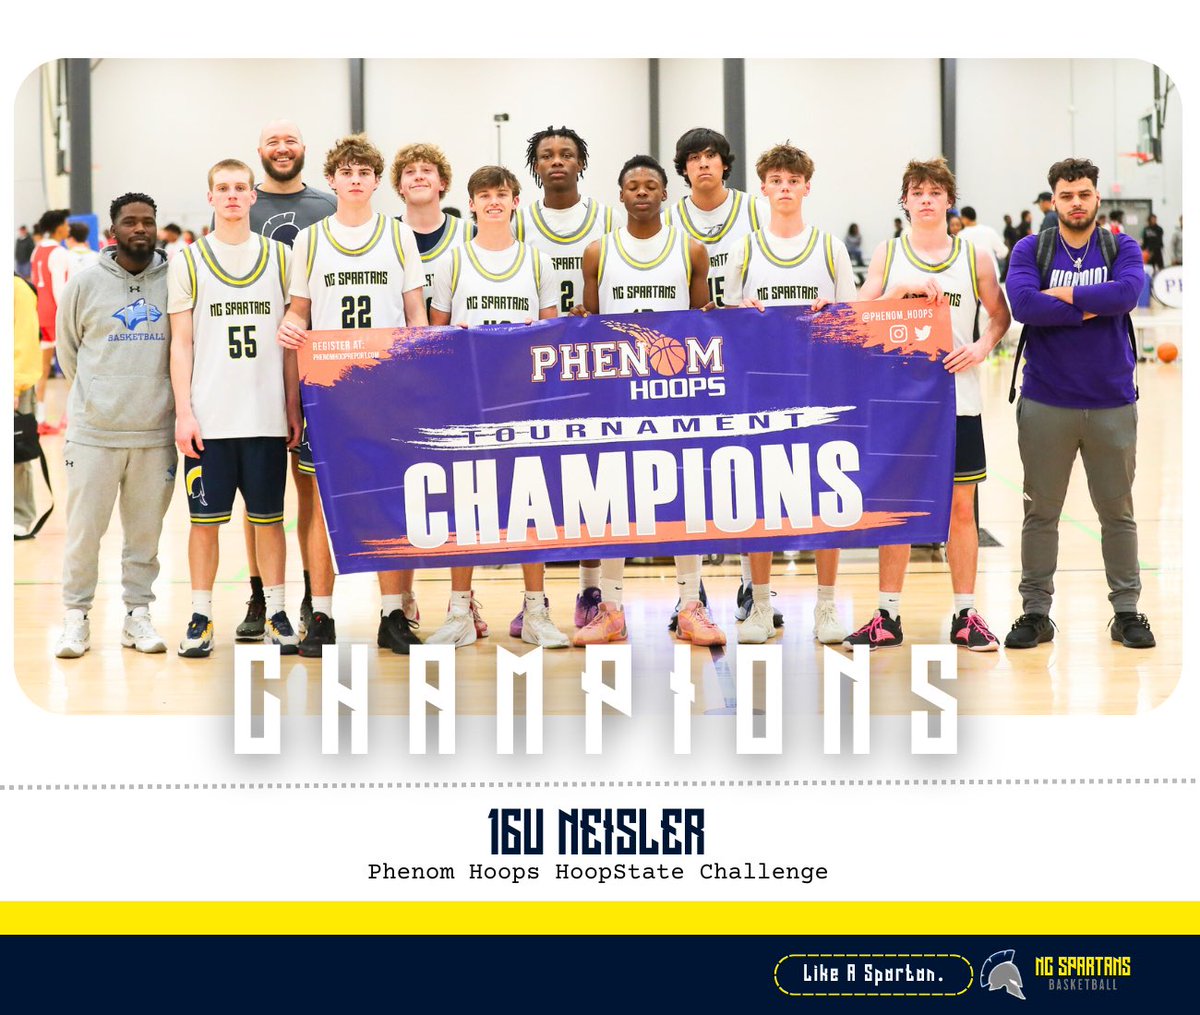 16U Neisler goes 5-0 with a point differential of 104 at the @Phenom_Hoops #PhenomHoopStateChallenge. 

Defeated SW15SH Elite 66-42 in the championship. 

Putting the #HoopState on notice and taking out shoe circuit teams in the process. 

#NCSpartans | #LikeASpartan